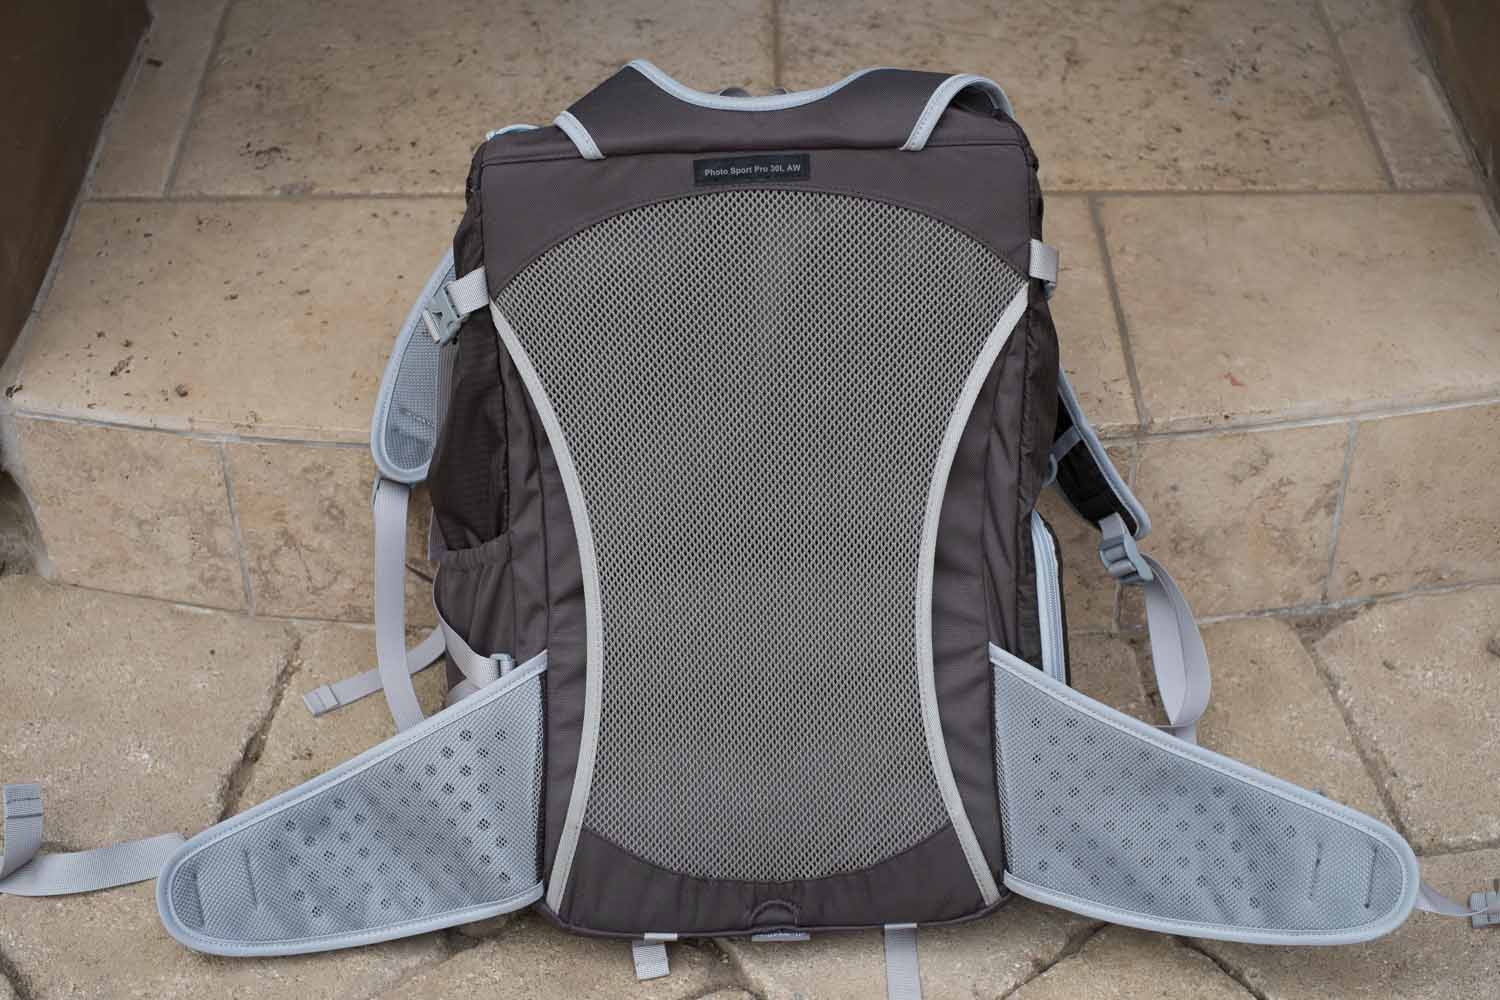 Review: Lowepro Photo Sport Pro 30L AW Backpack - The Phoblographer